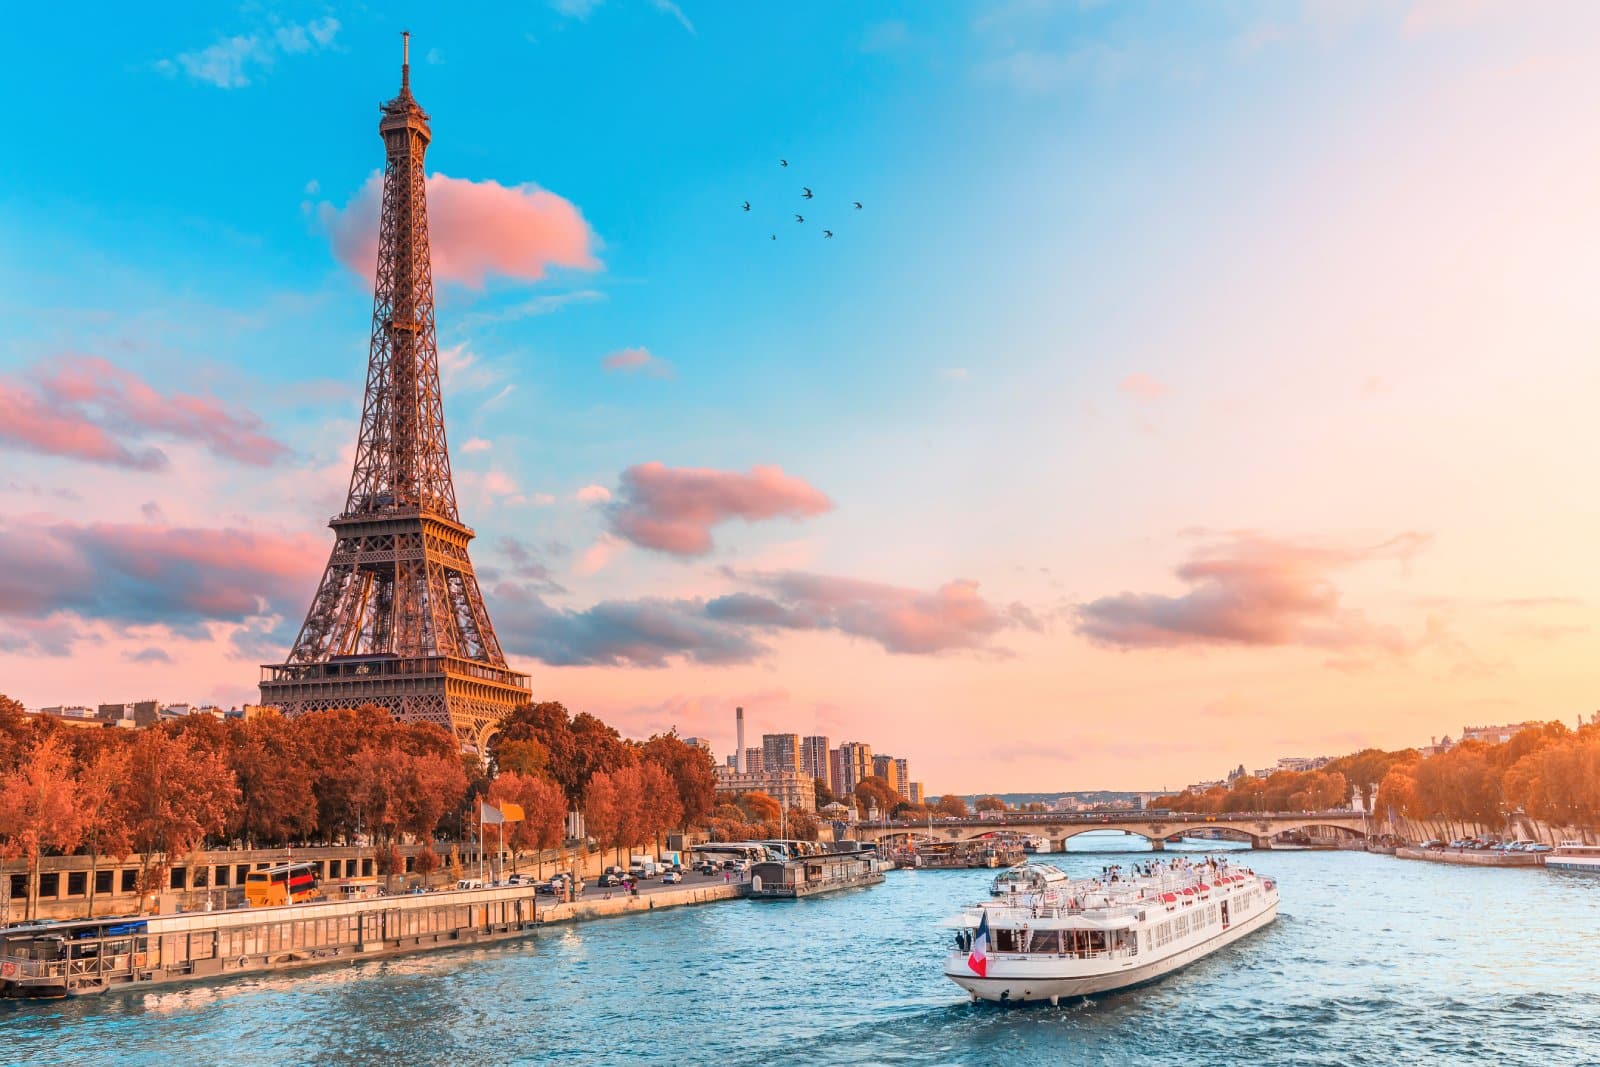 <p class="wp-caption-text">Image Credit: Shutterstock / frantic00</p>  <p>The City of Light shines bright on any budget, with its fashion, food, and art. Just be prepared for your wallet to feel significantly lighter too.</p>